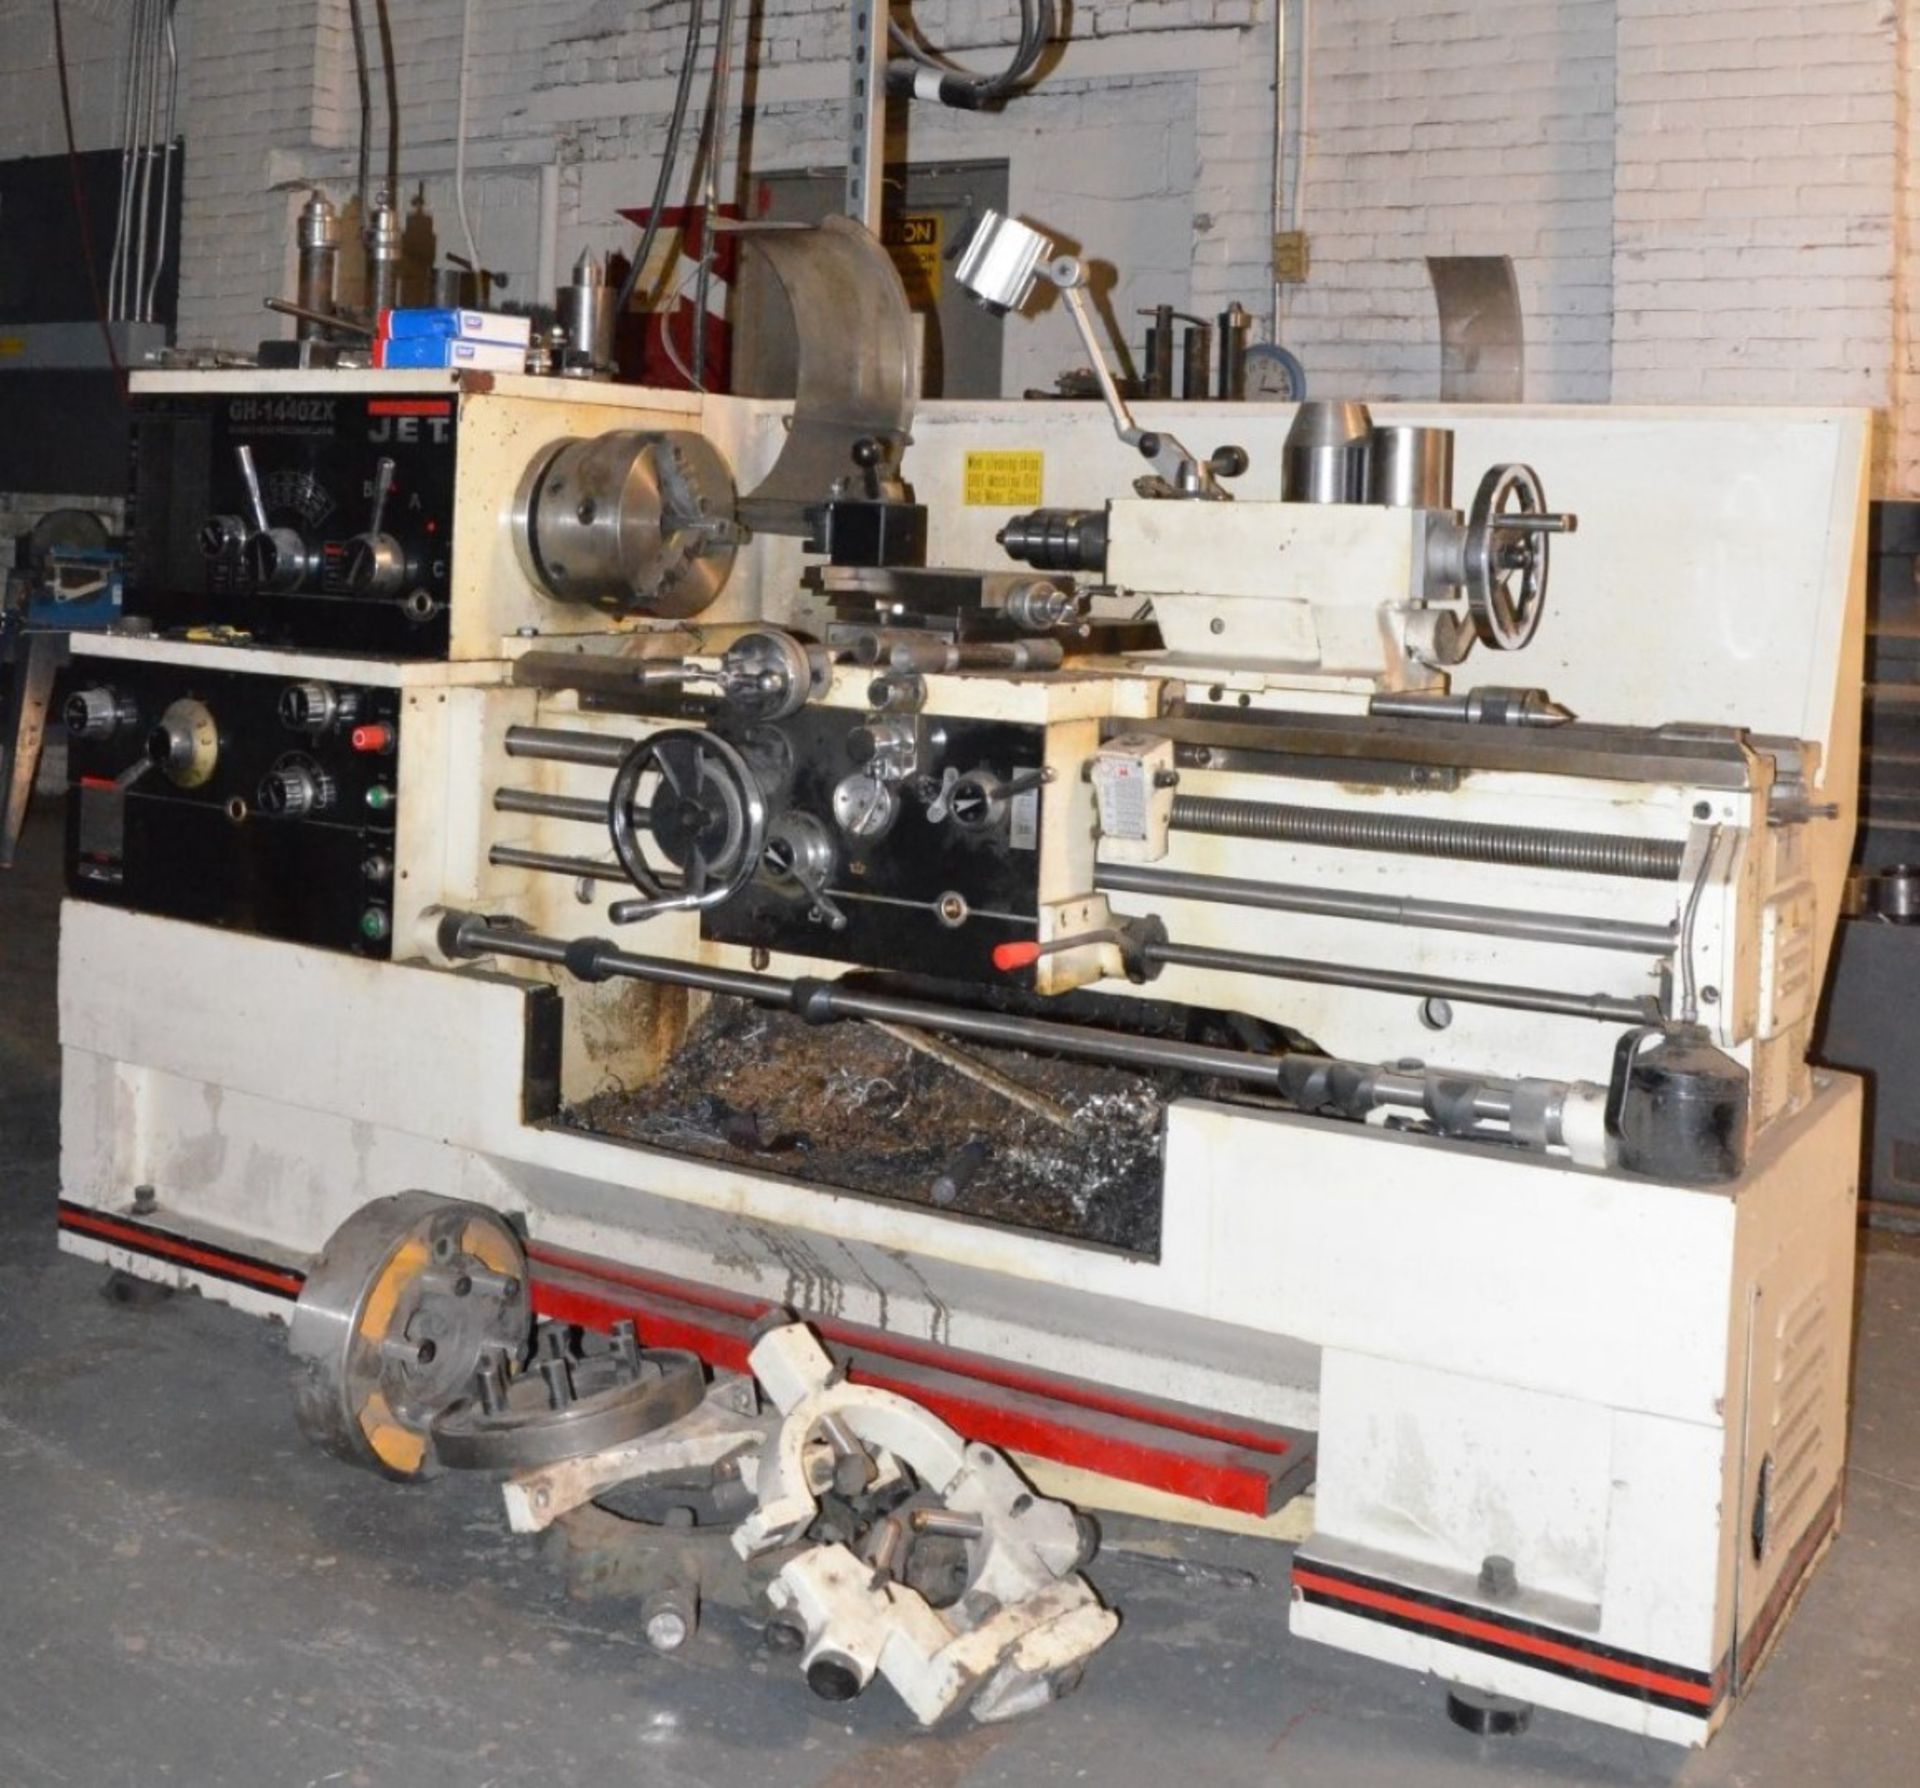 JET (2010) GH-1440ZX GAP BED ENGINE LATHE WITH 14" SWING OVER BED, 23" SWING IN THE GAP, 40" BETWEEN